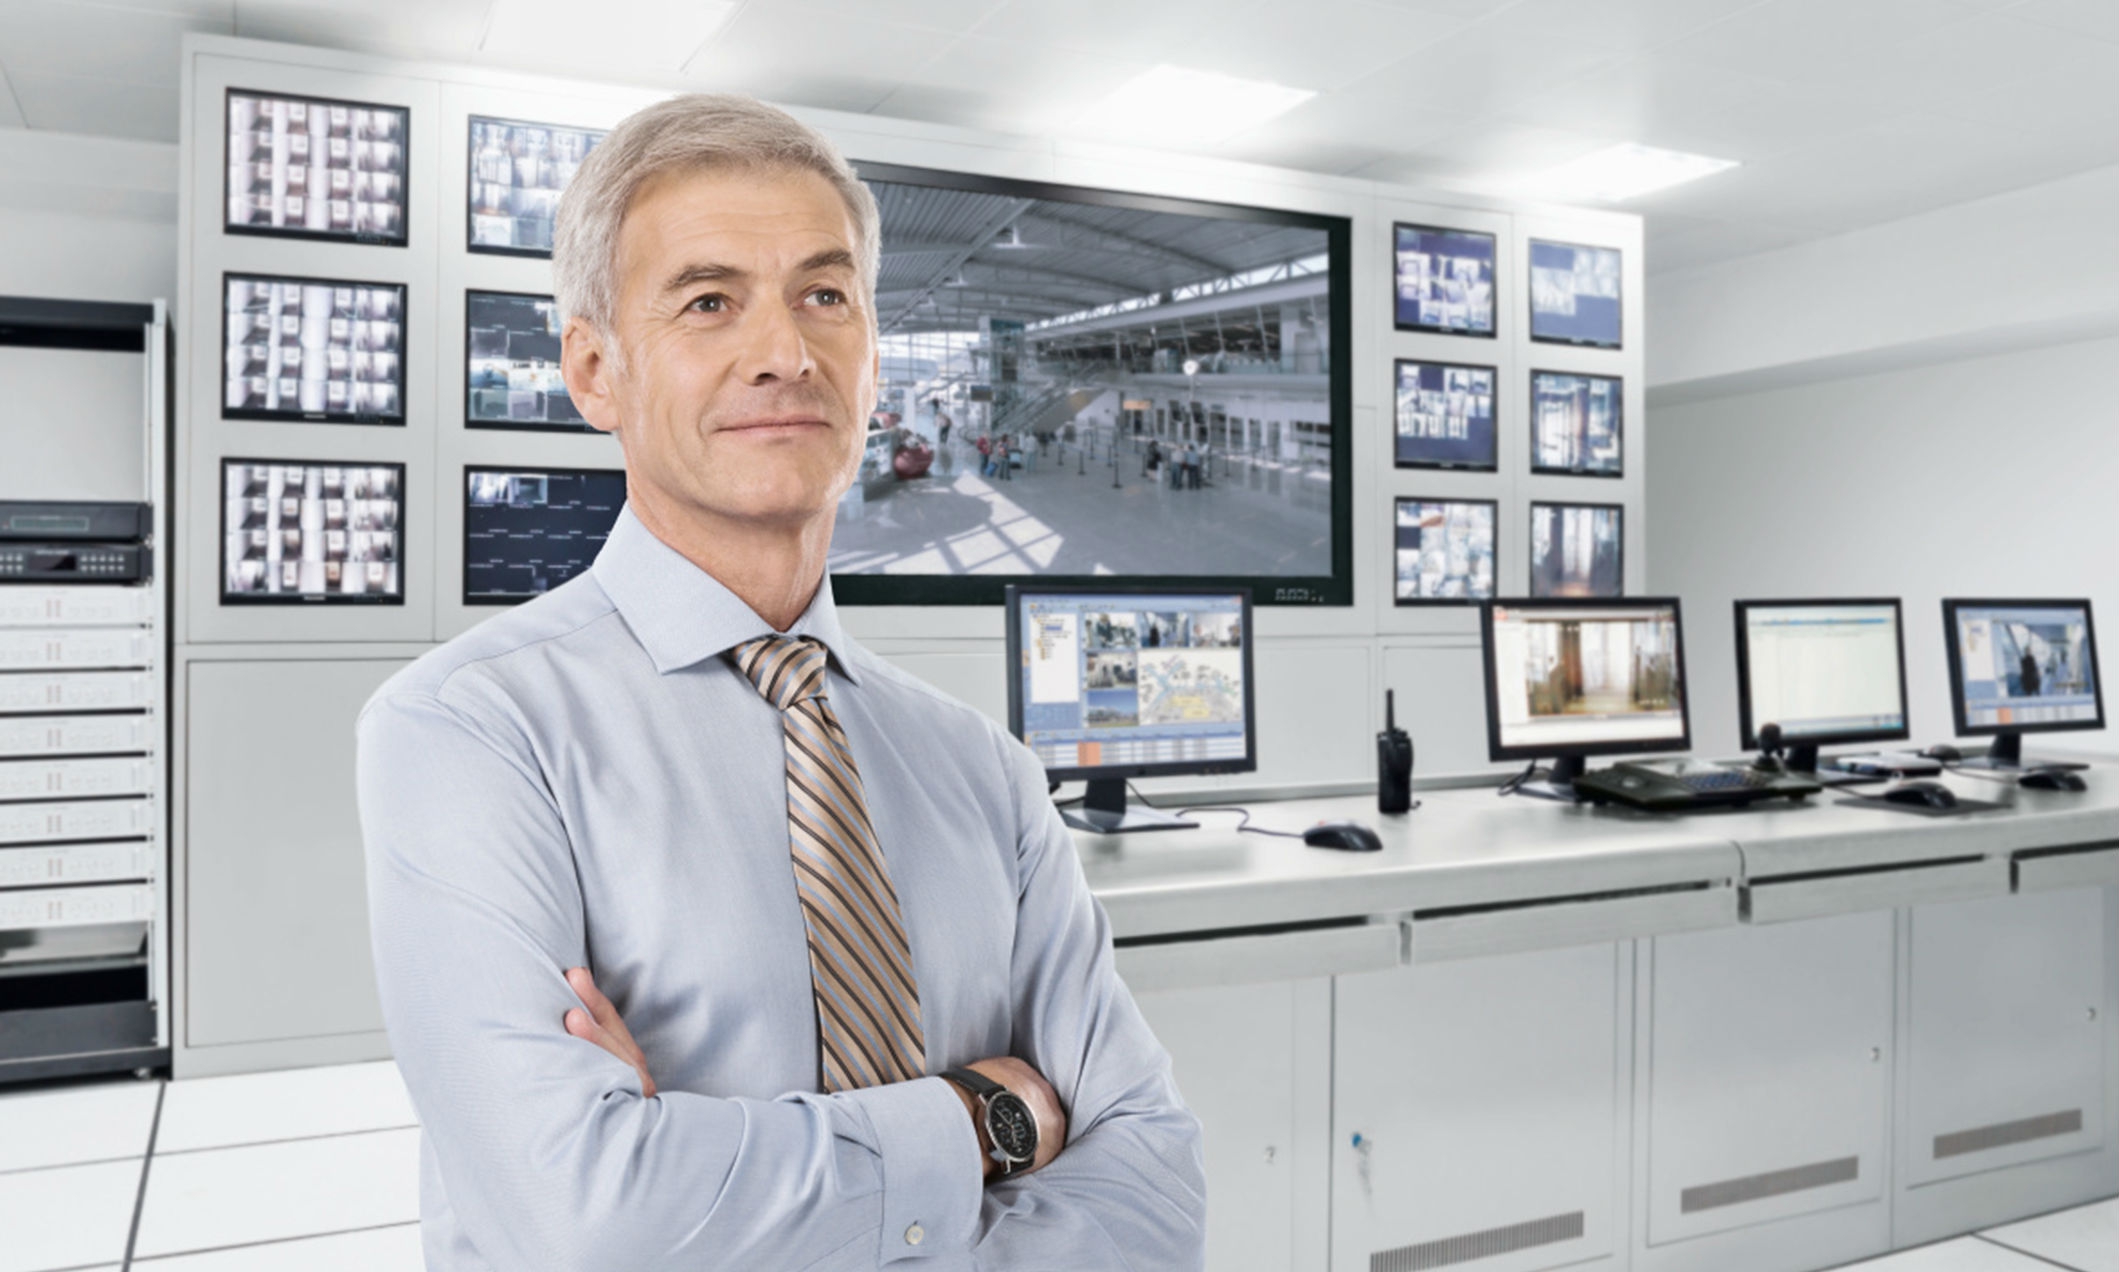 Bosch building integration system adds public address and improved cyber security